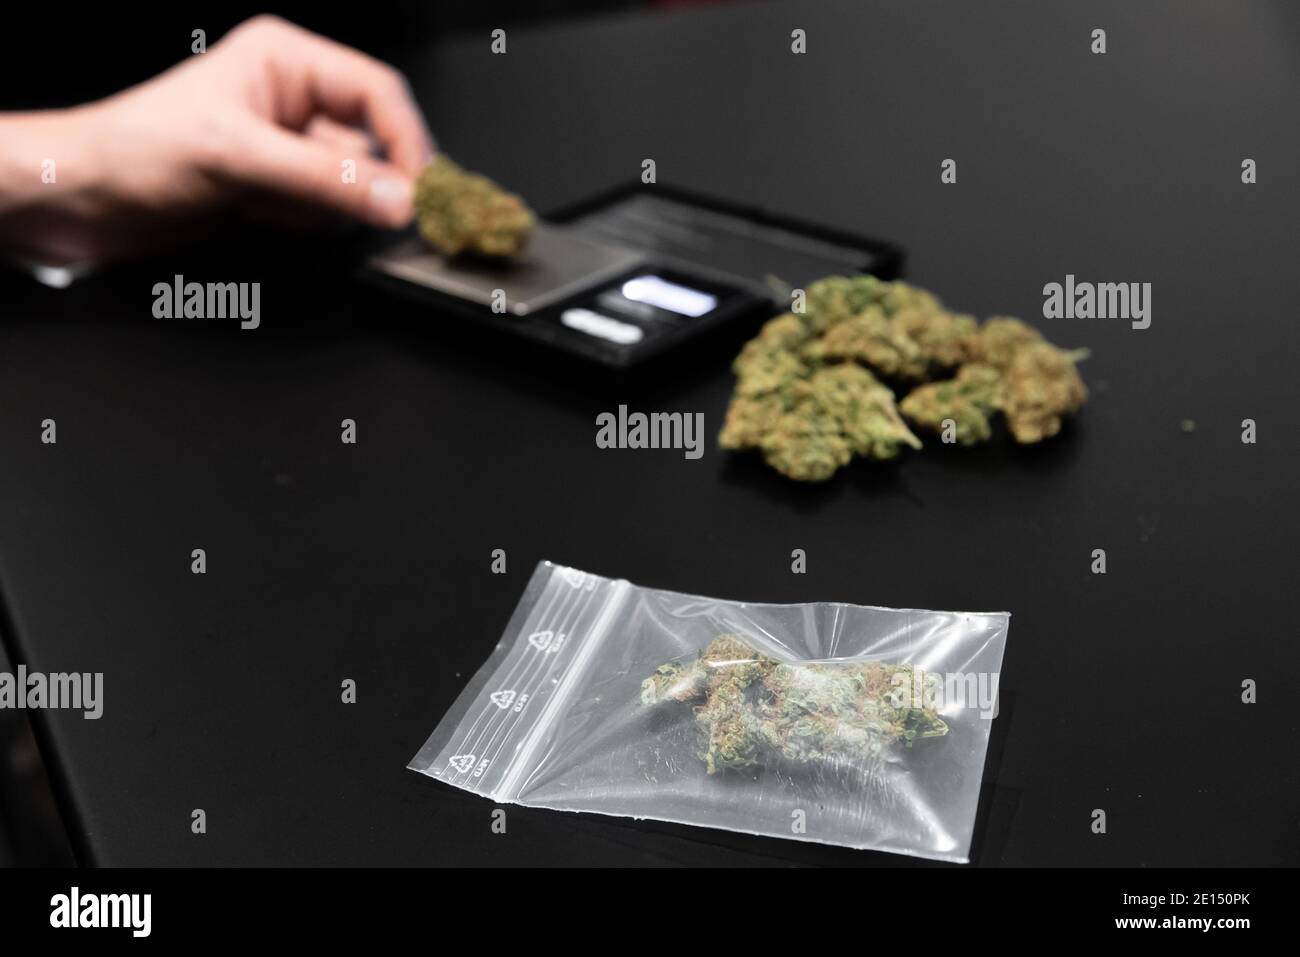 Cannabis buds on a scale and packed Stock Photo